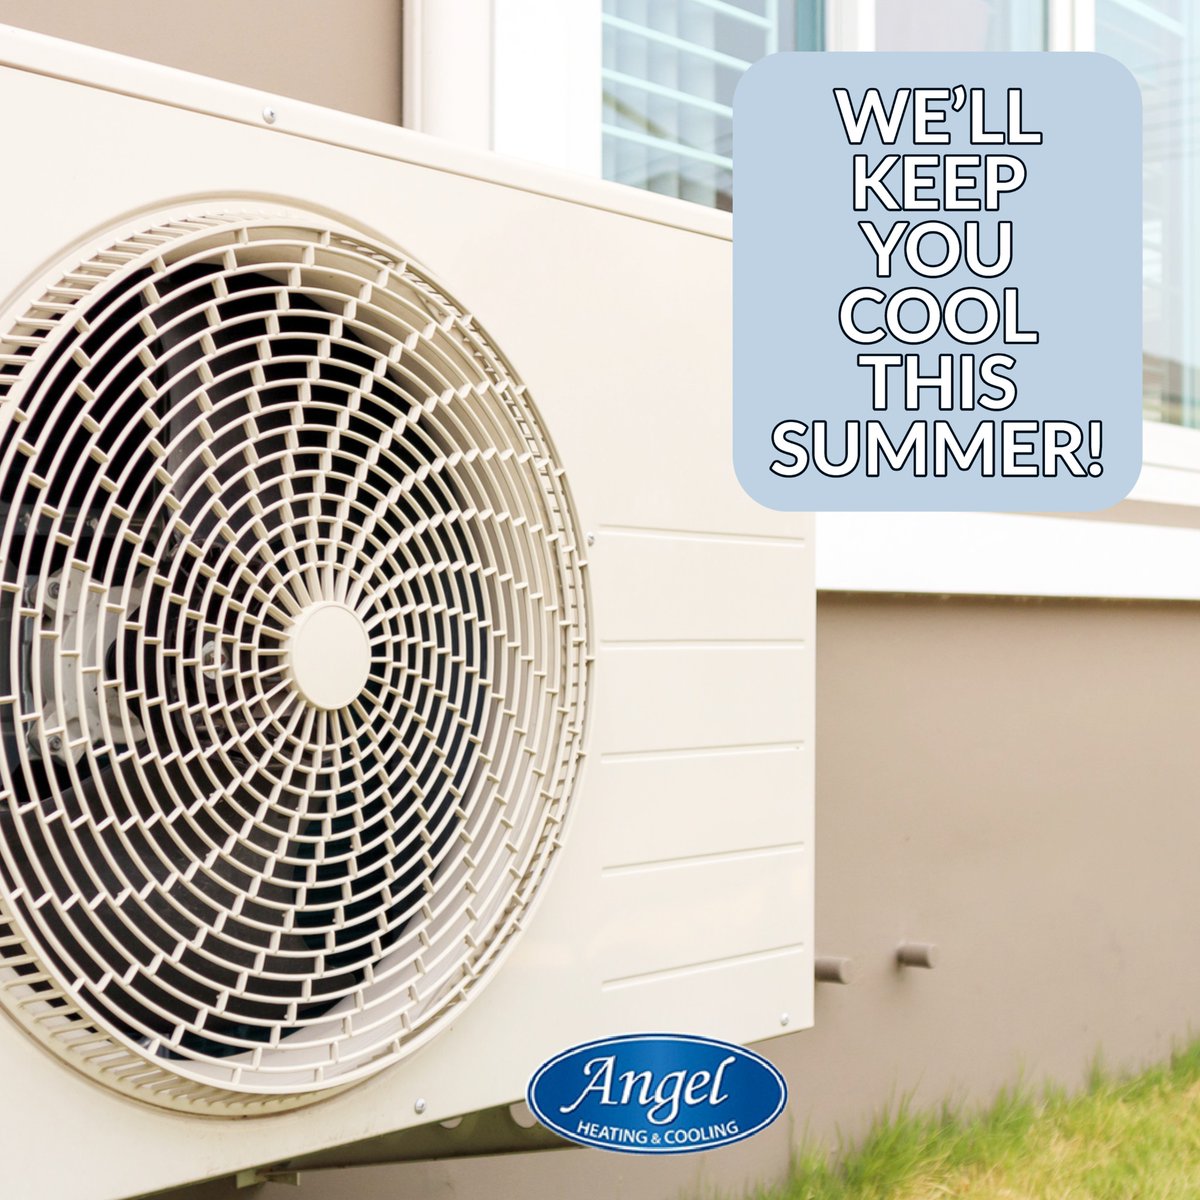 Our skilled technicians provide exceptional HVAC services every time 💯👨‍🔧 We at Angel Heating & Cooling take pride in offering our clients the best services. Call us for all your cooling needs! #ExceptionalServices #HVACexperts